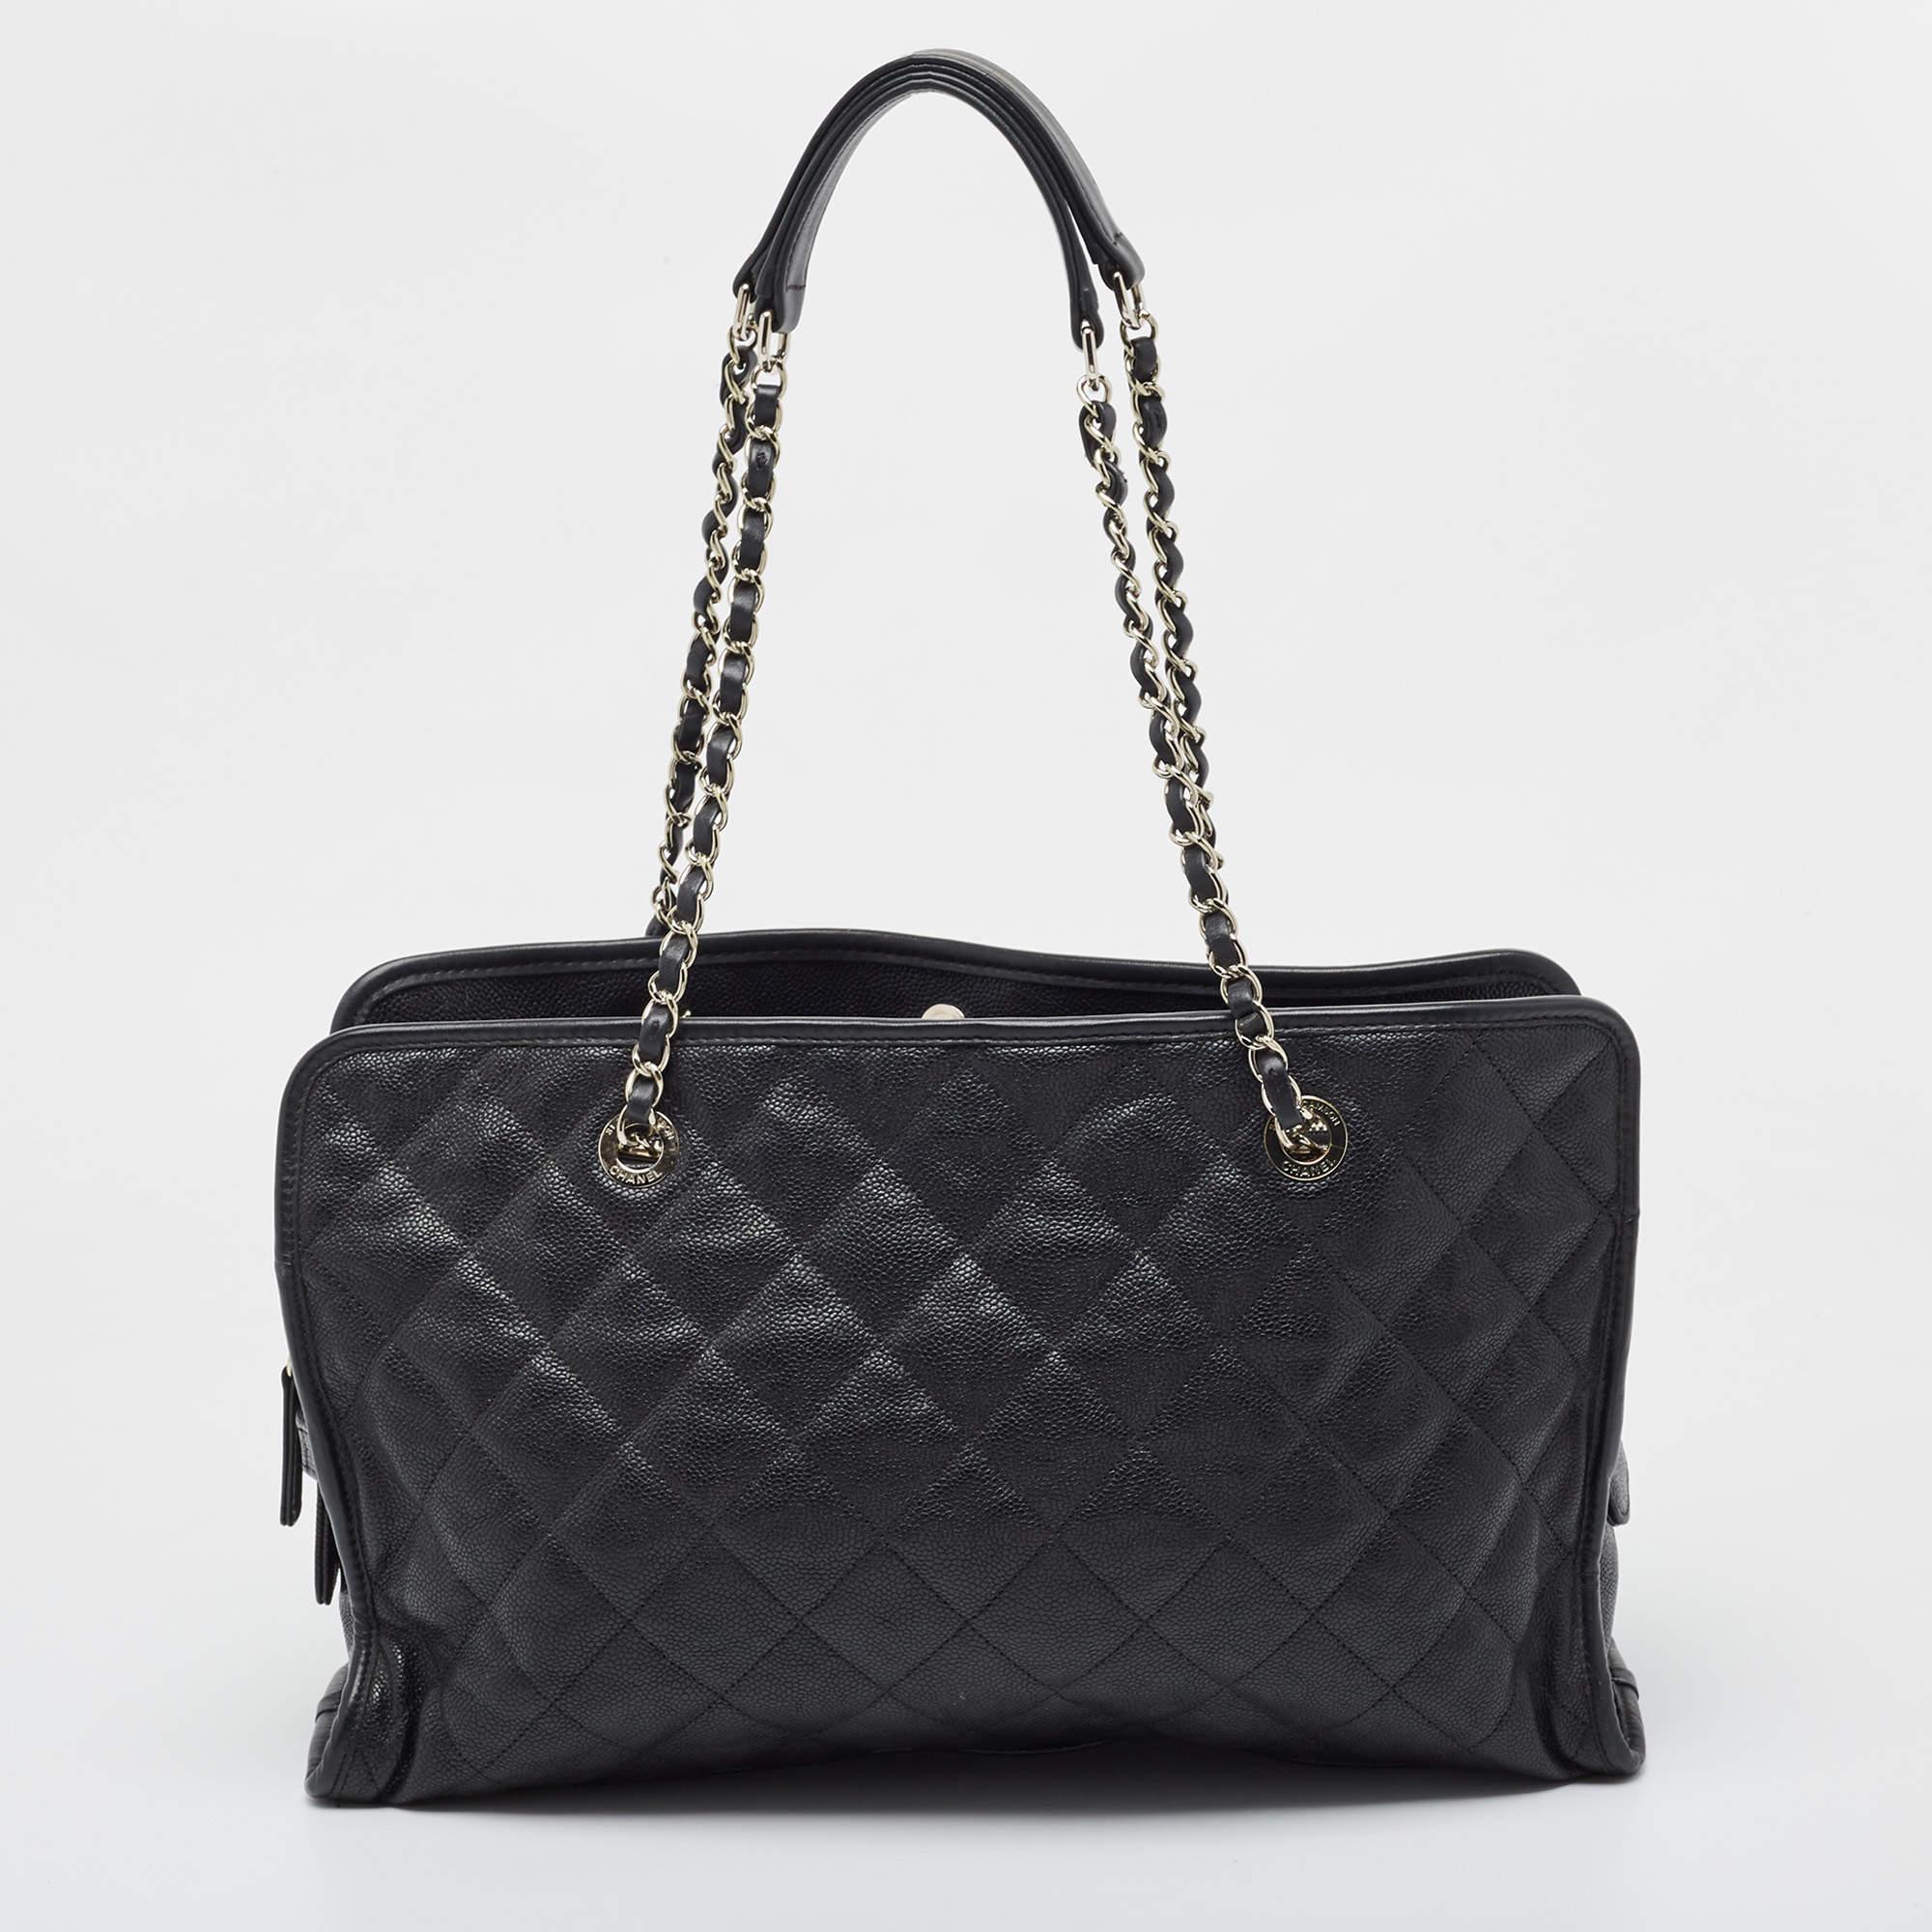 Chanel Black Quilted Caviar Leather French Riviera Tote 4